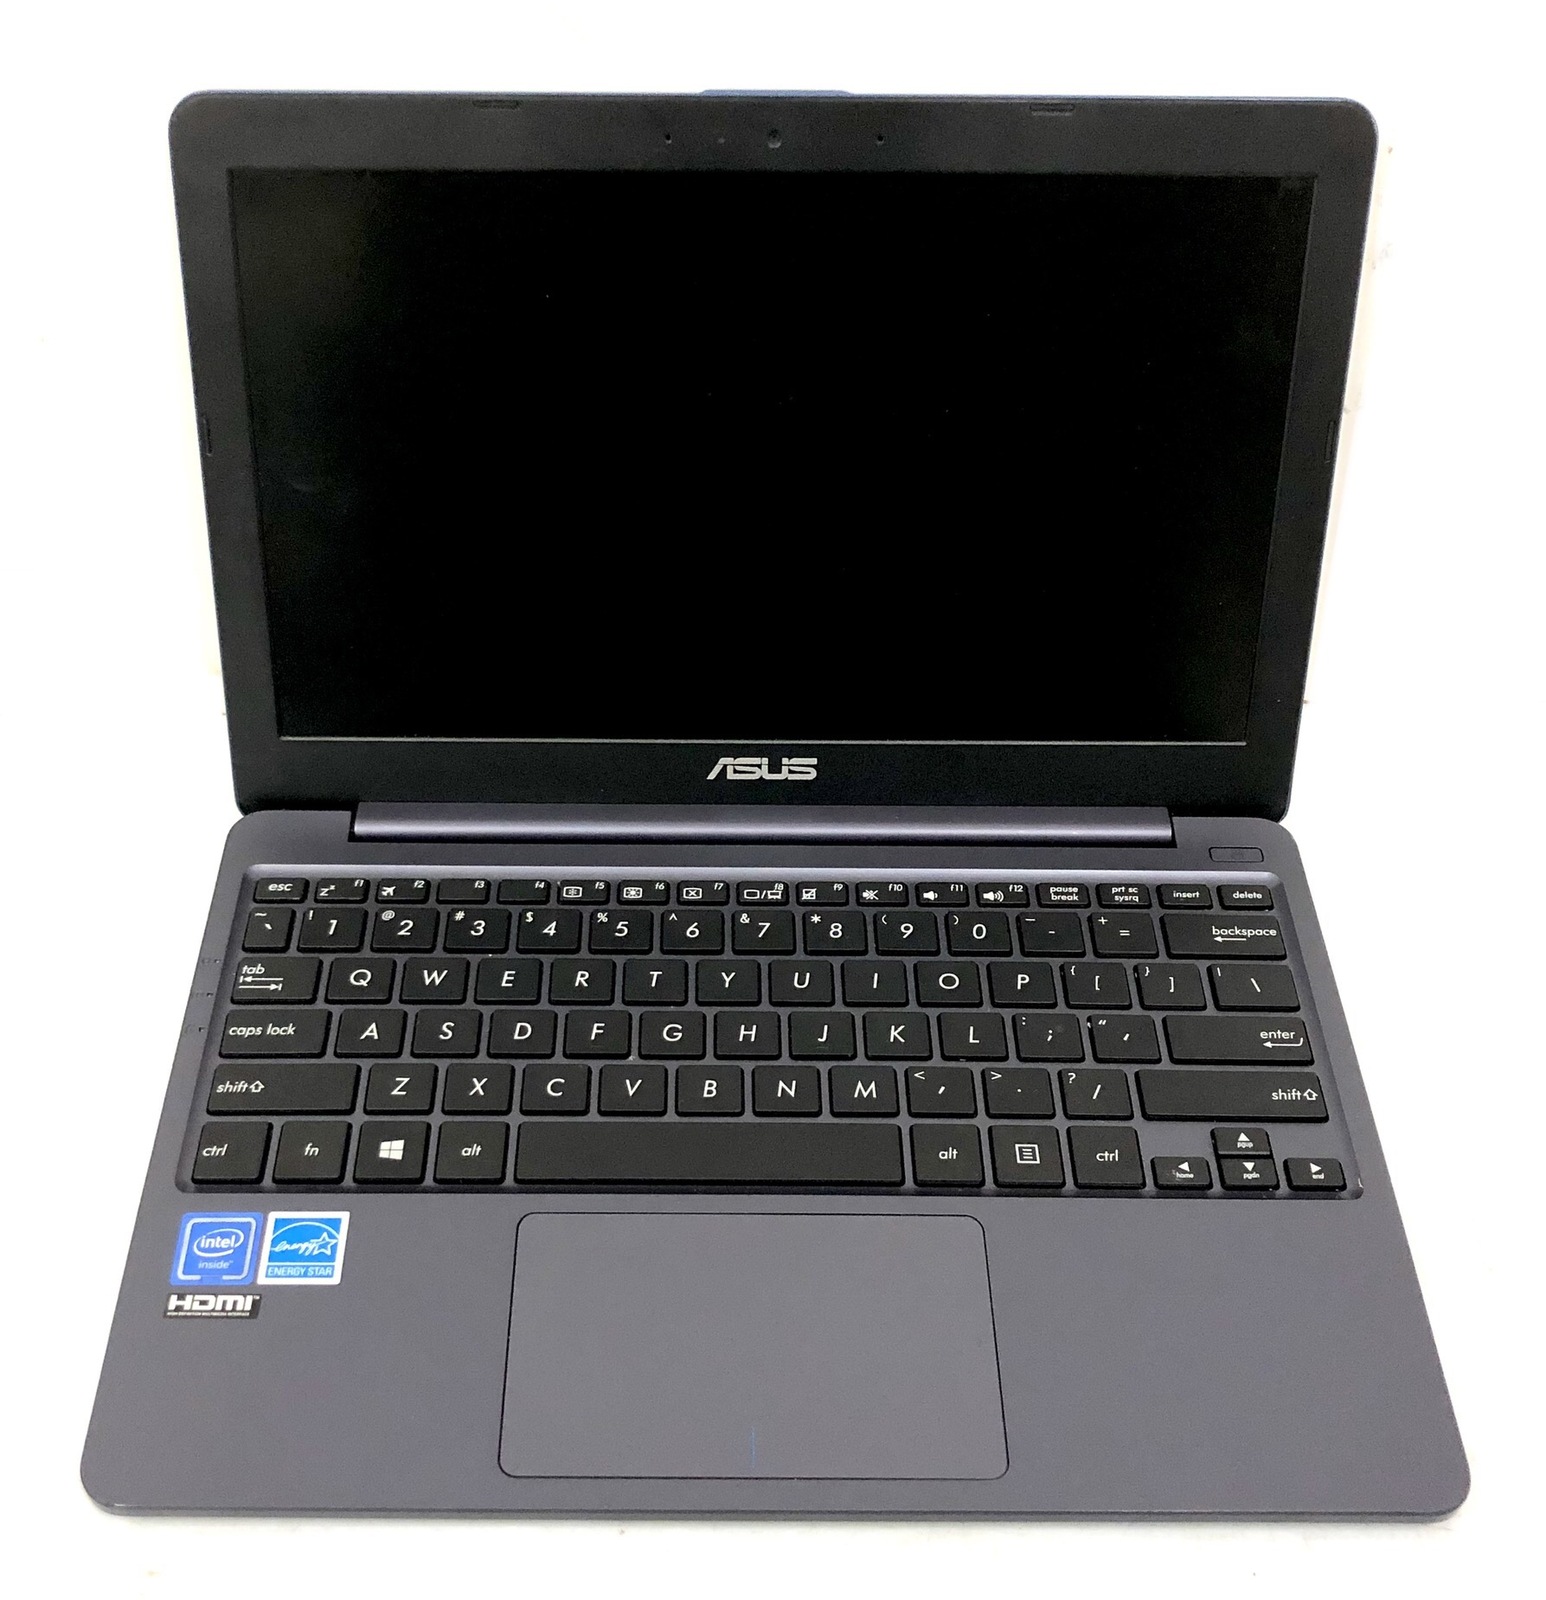 Asus Laptop E203m Pc Laptops And Netbooks 7524